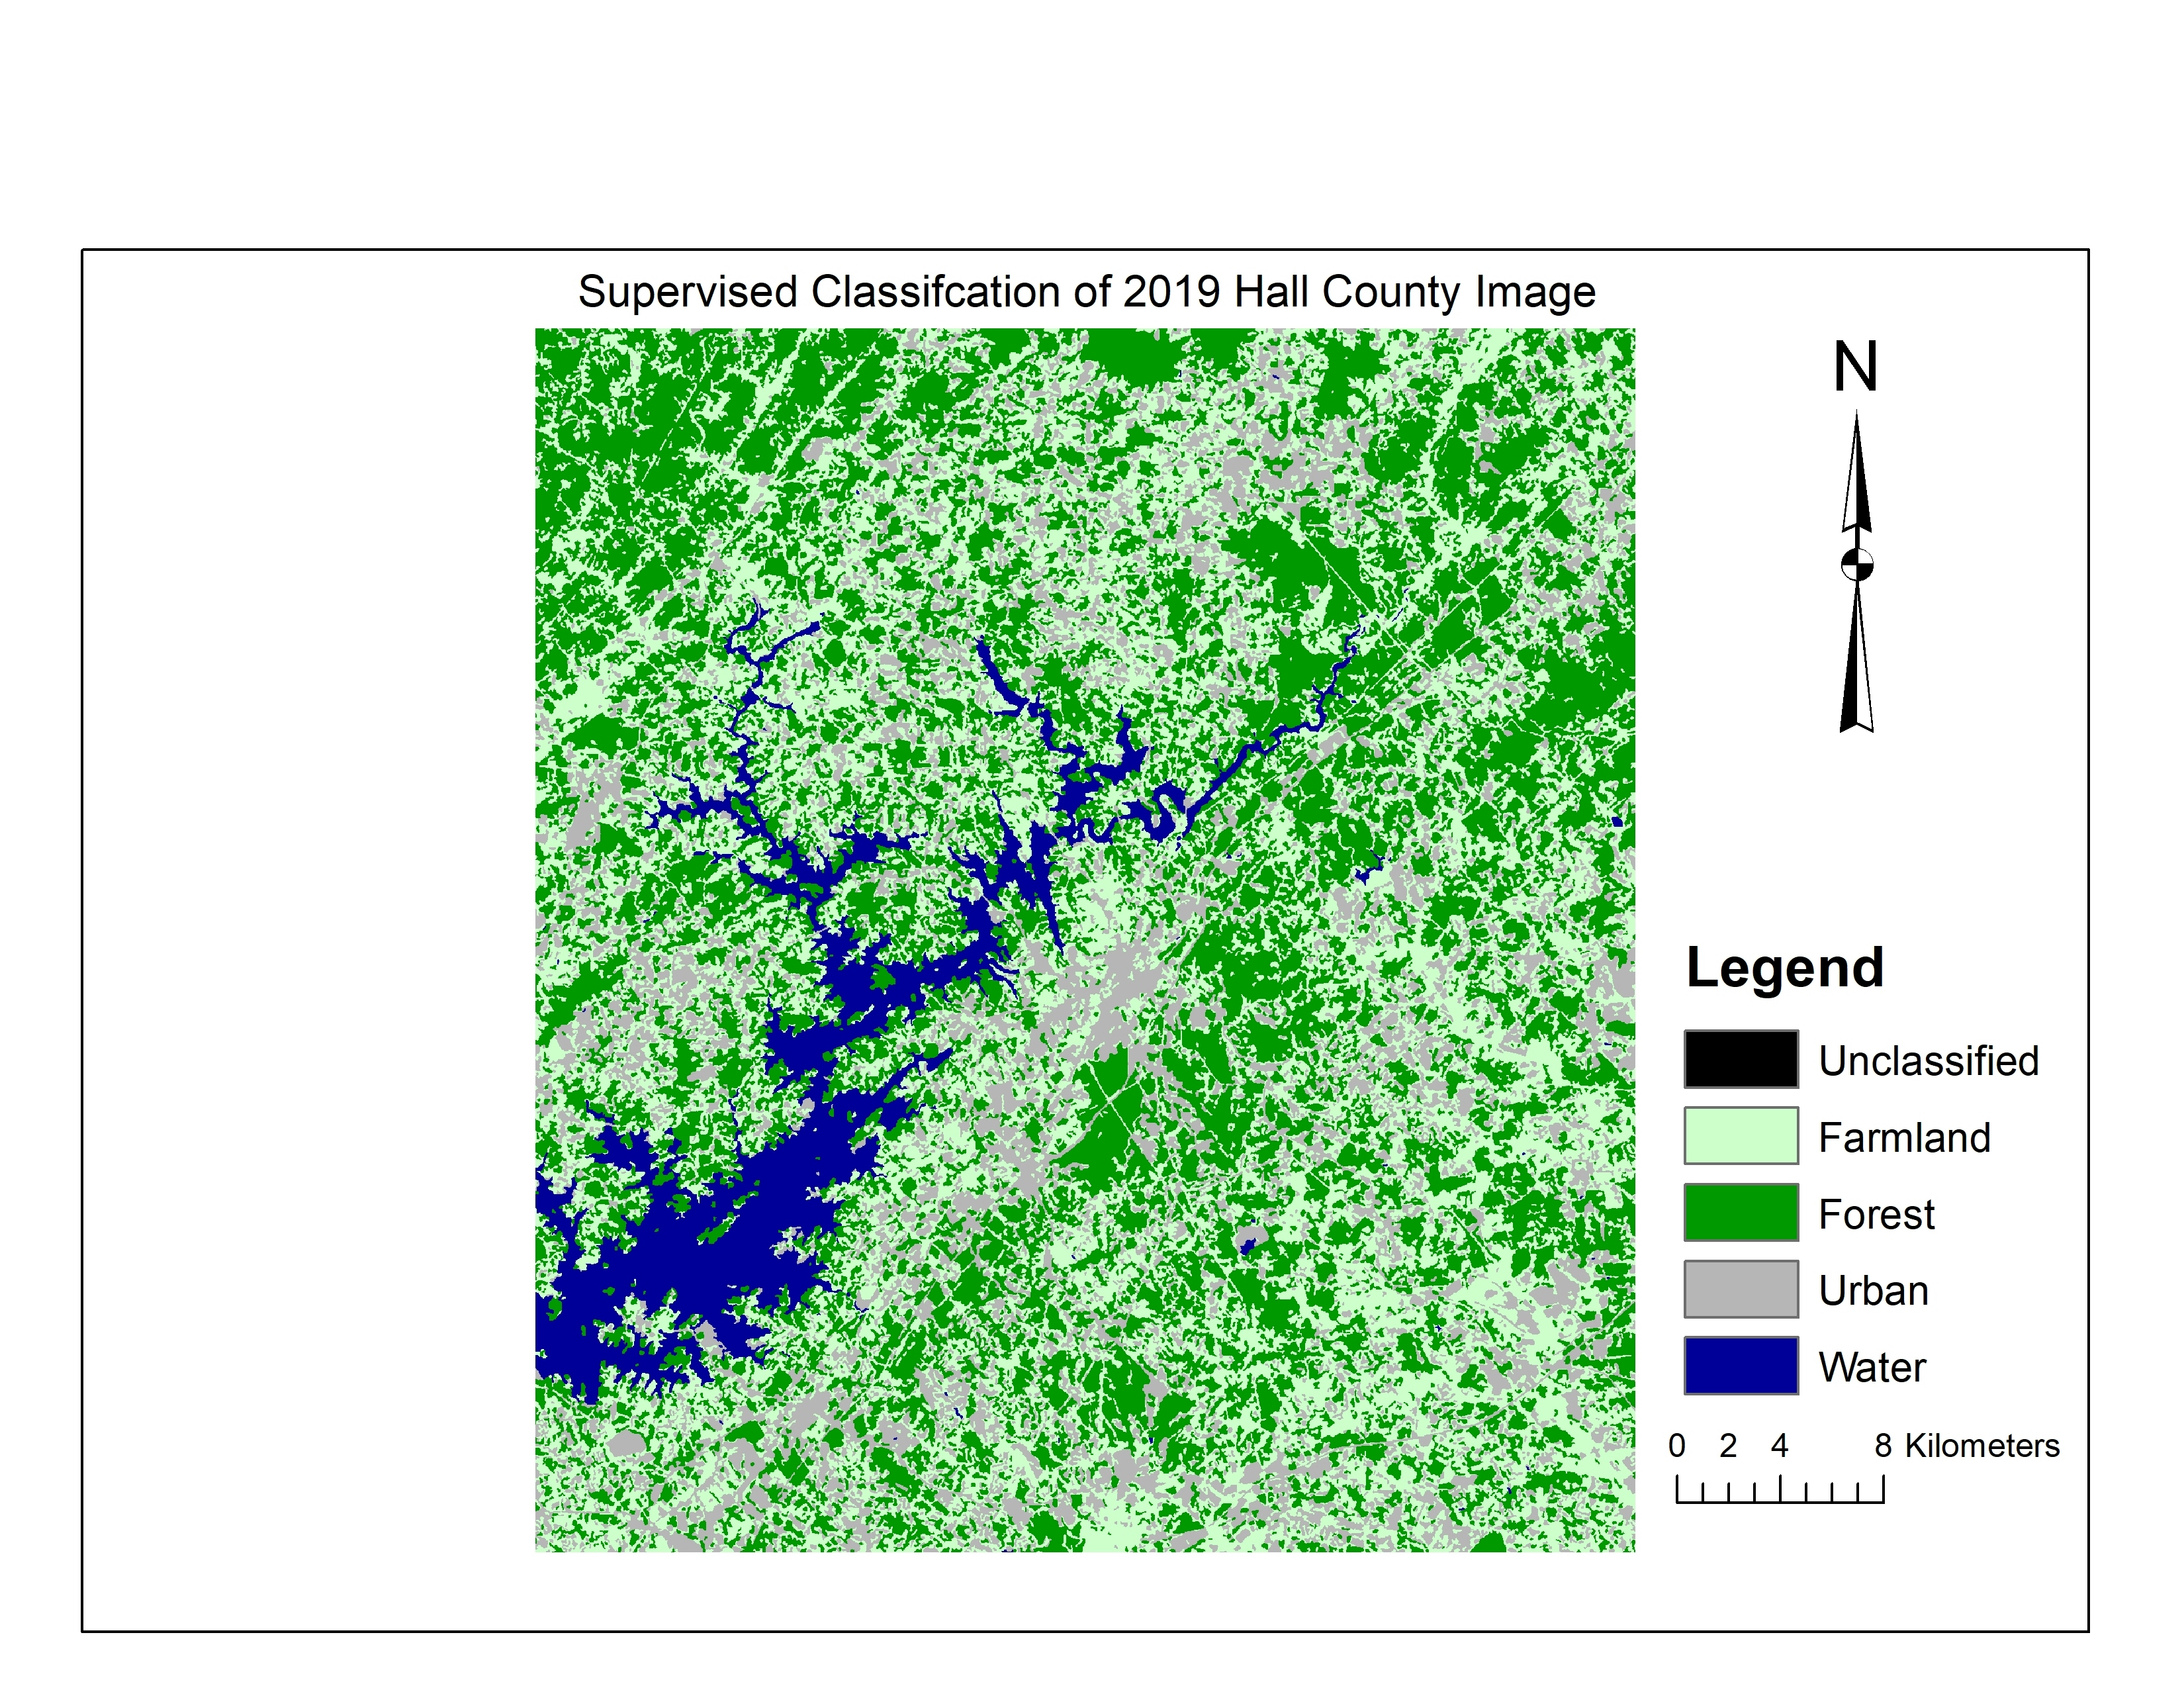 Supervised classification image of Hall County, Georgia